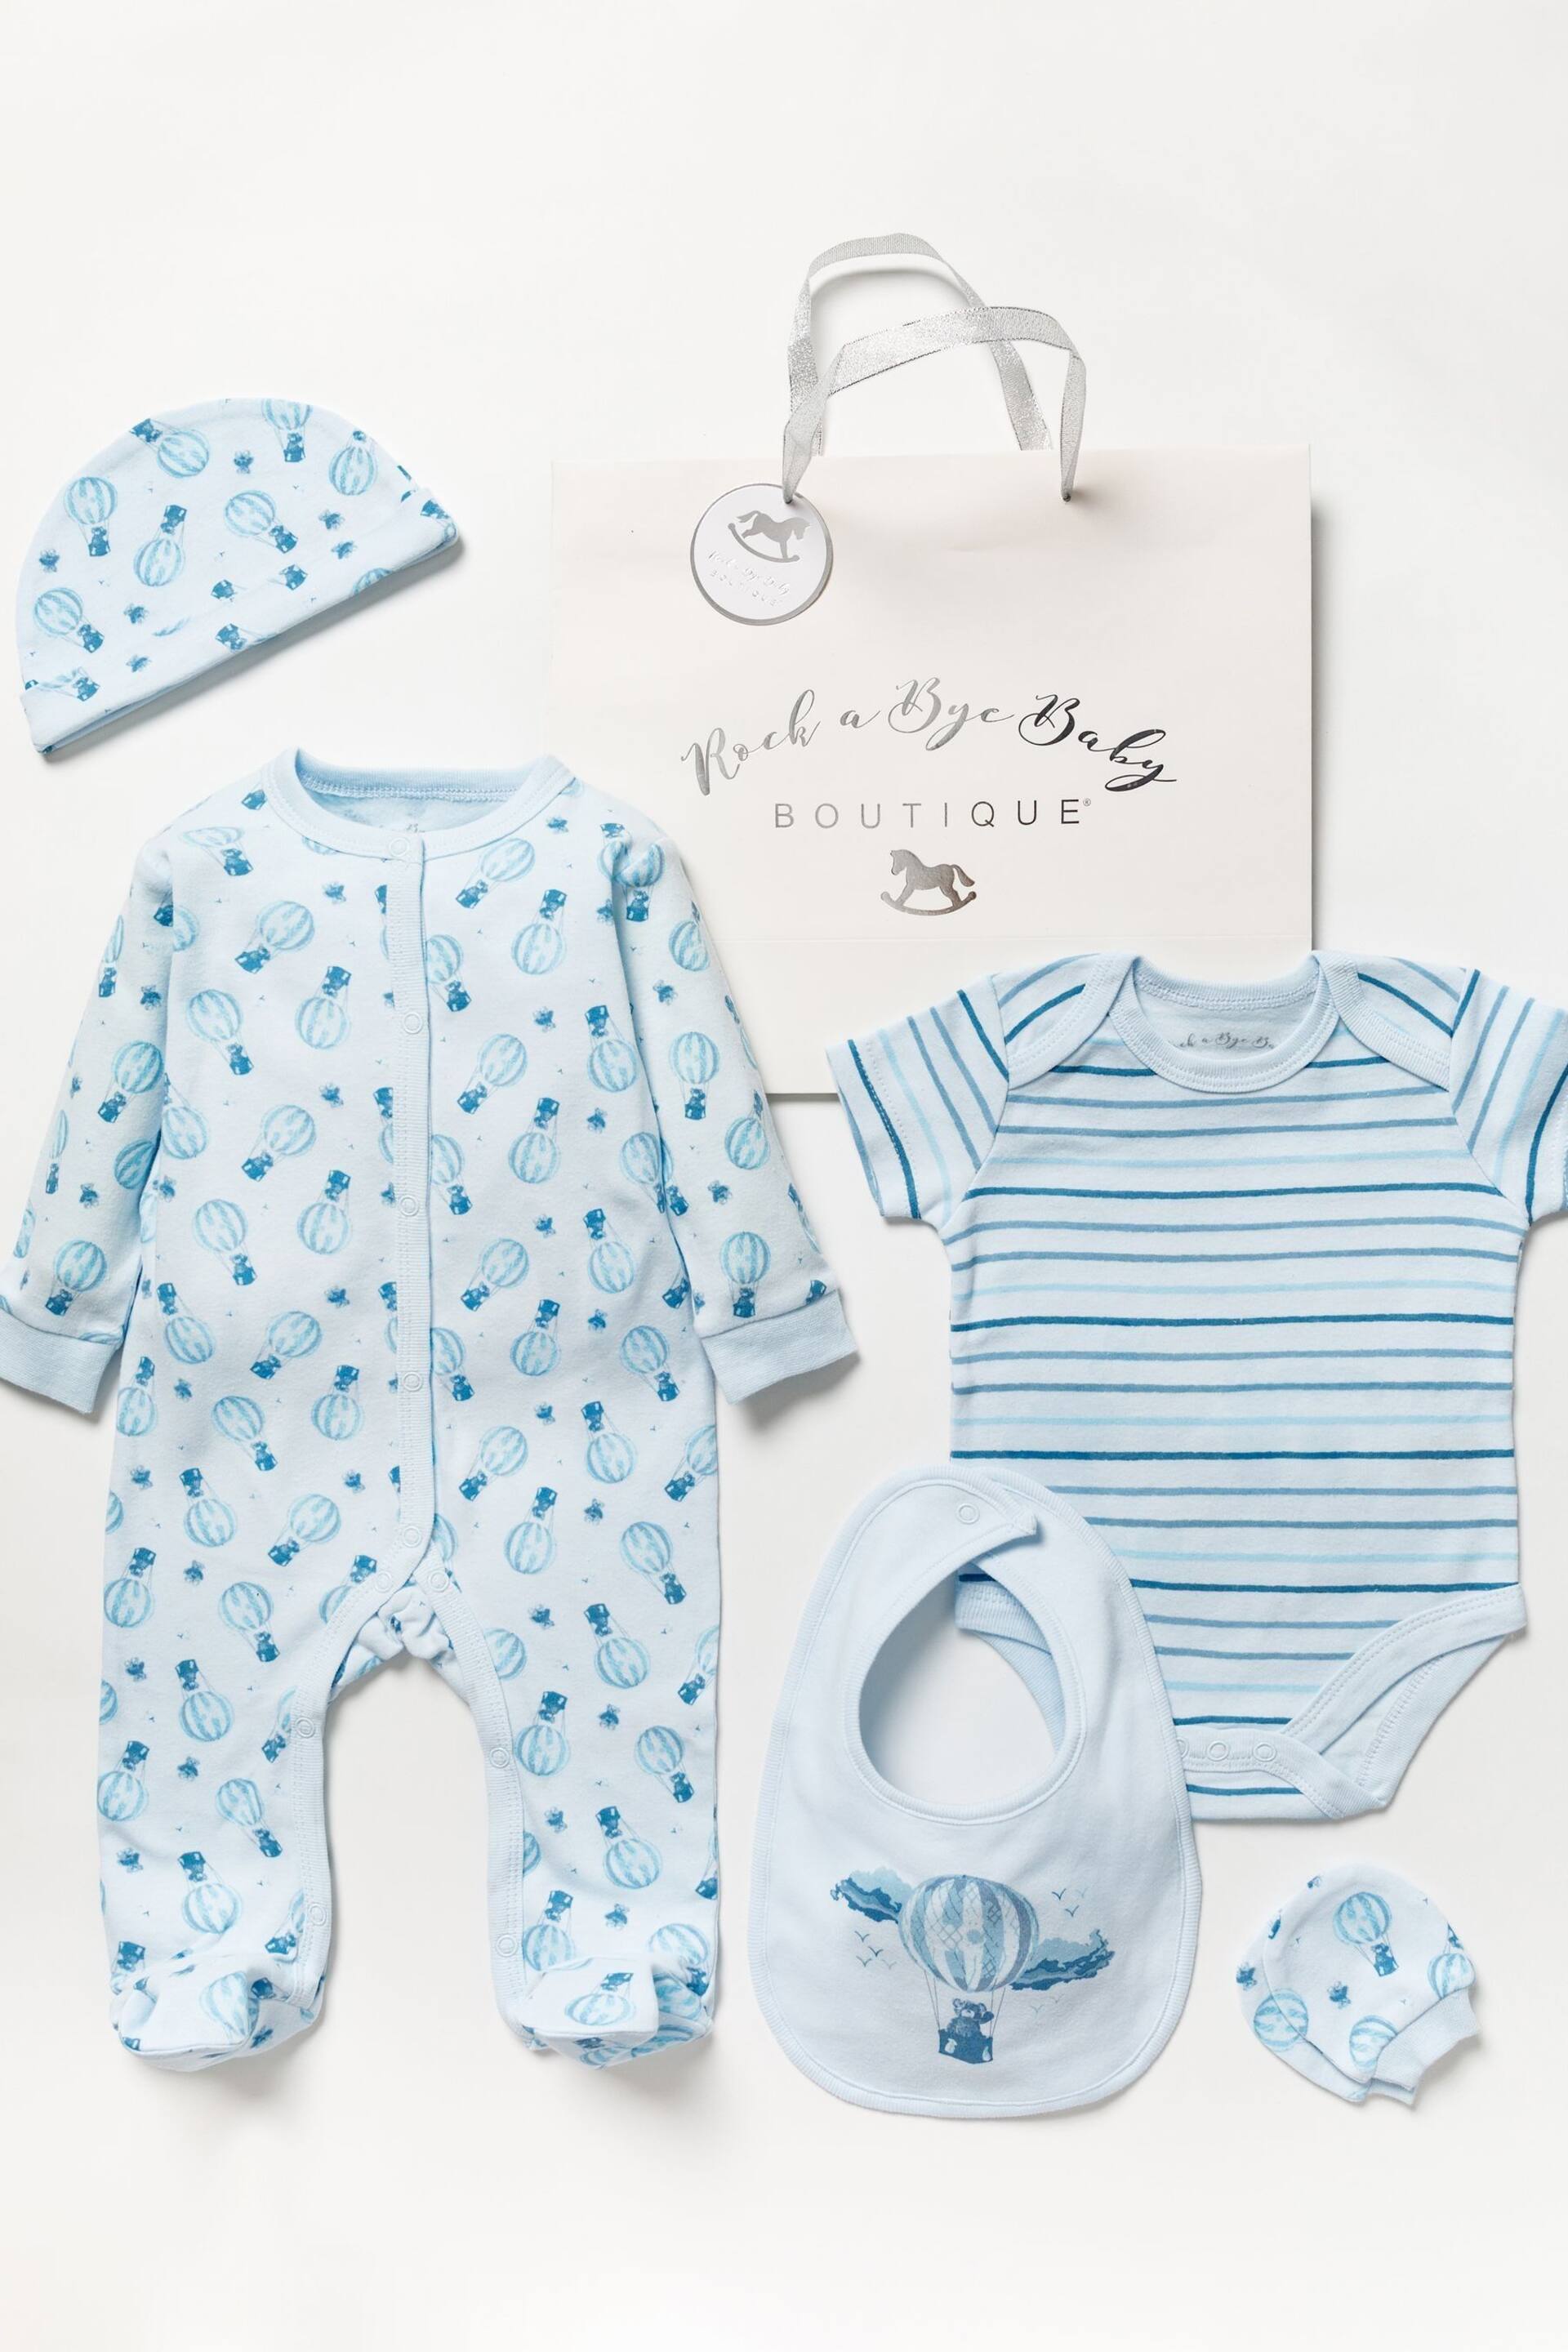 Rock-A-Bye Baby Boutique Blue Hot Air Balloon Printed Cotton 5-Piece Baby Gift Set - Image 1 of 5